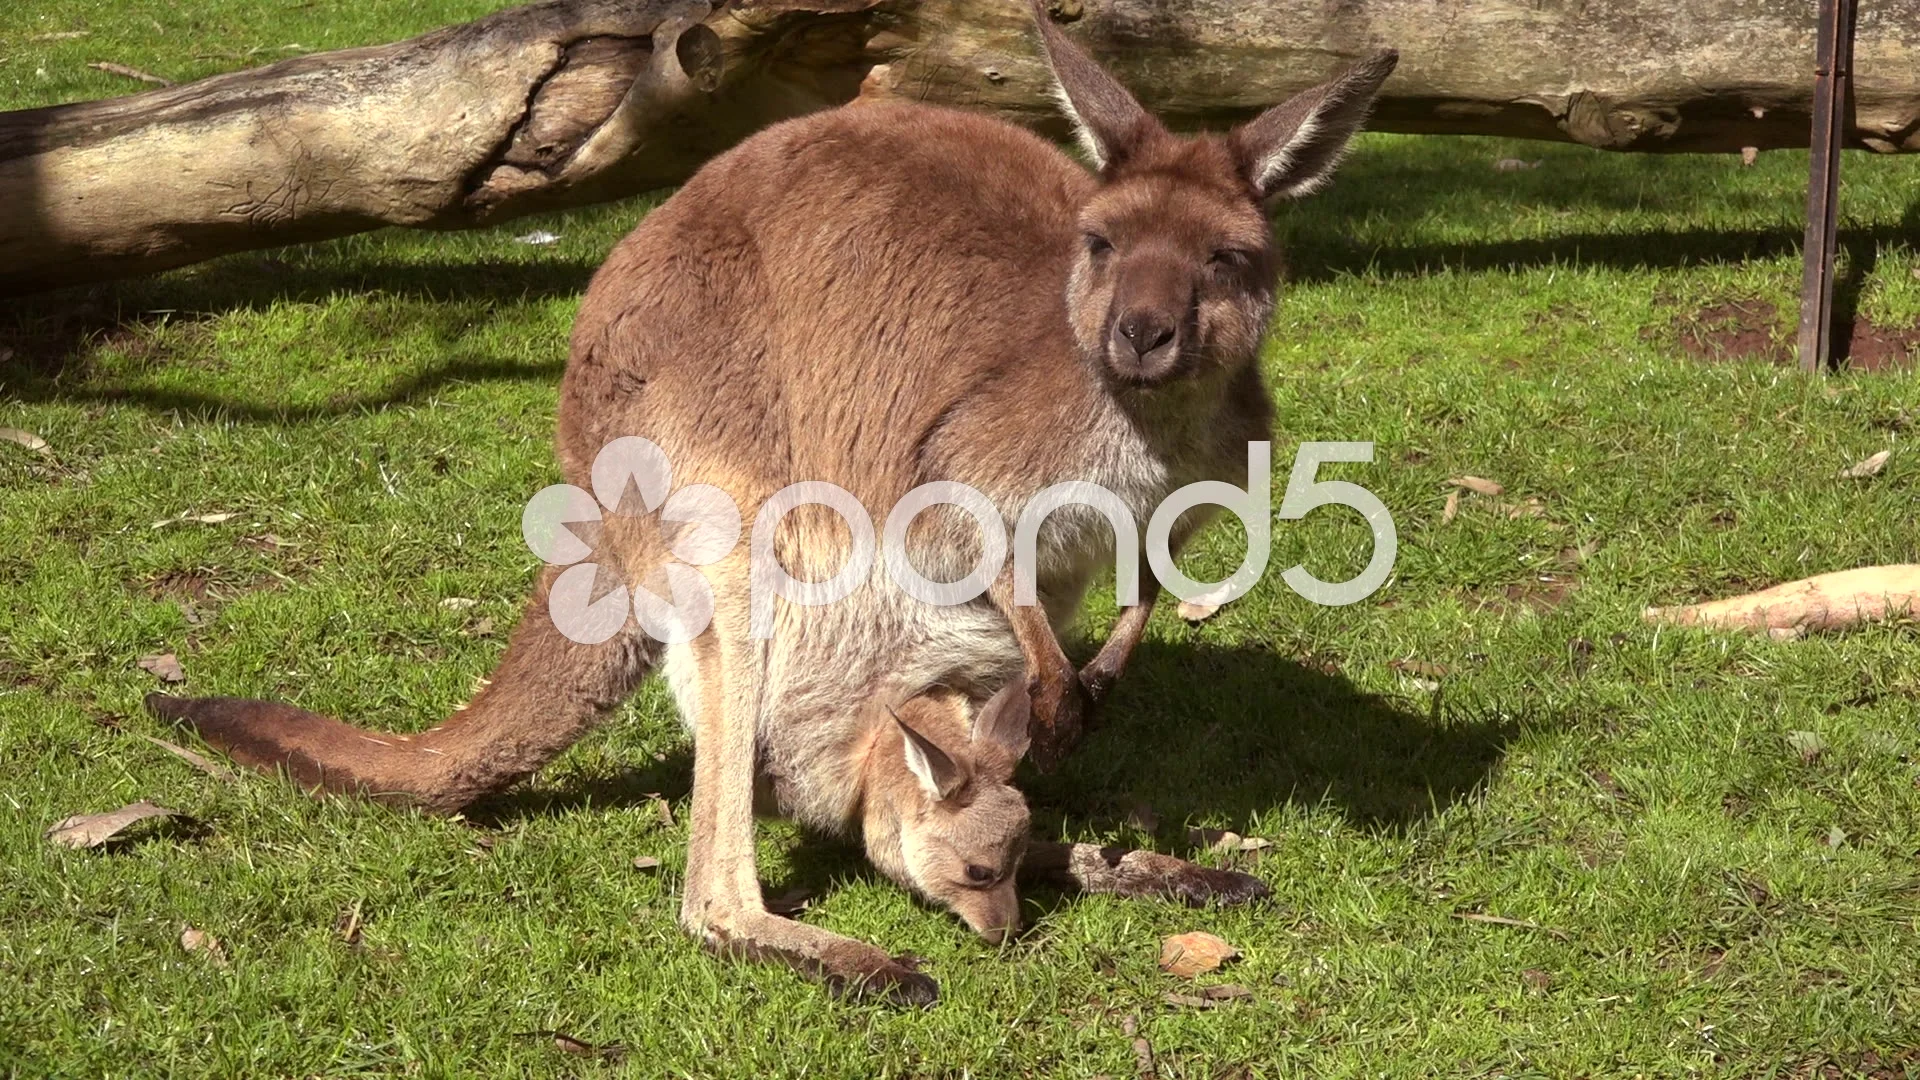 kangaroo with baby in pouch